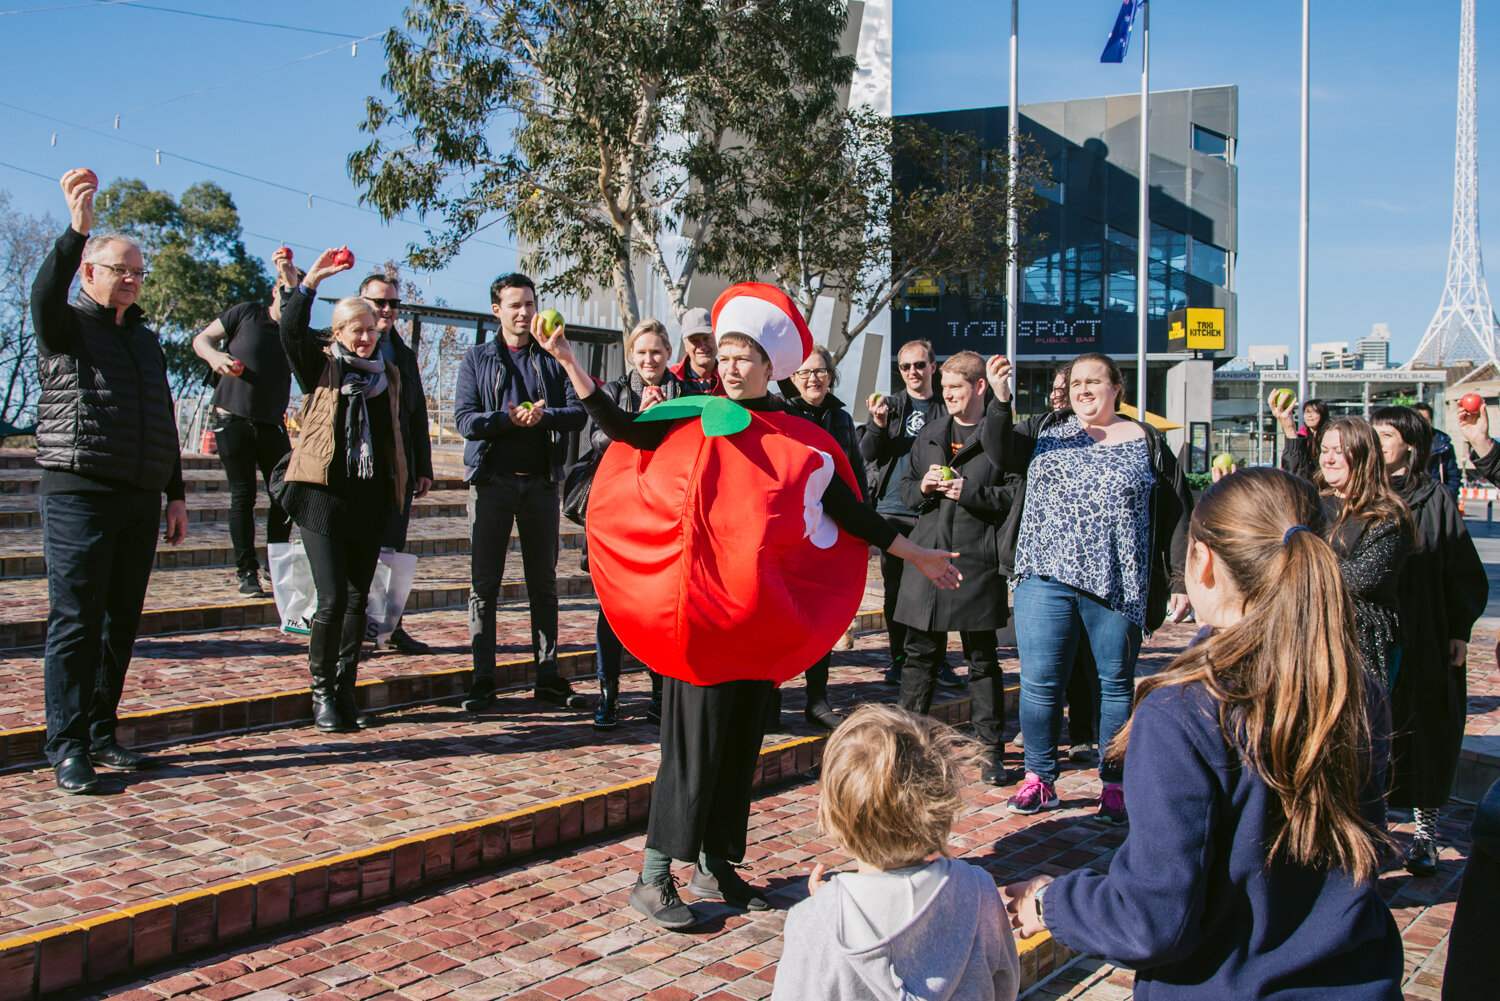 Episode 10 centred around the idea of 'Serious Play', shown by staging a protest of the then in-development Apple Store in Federation Square. 